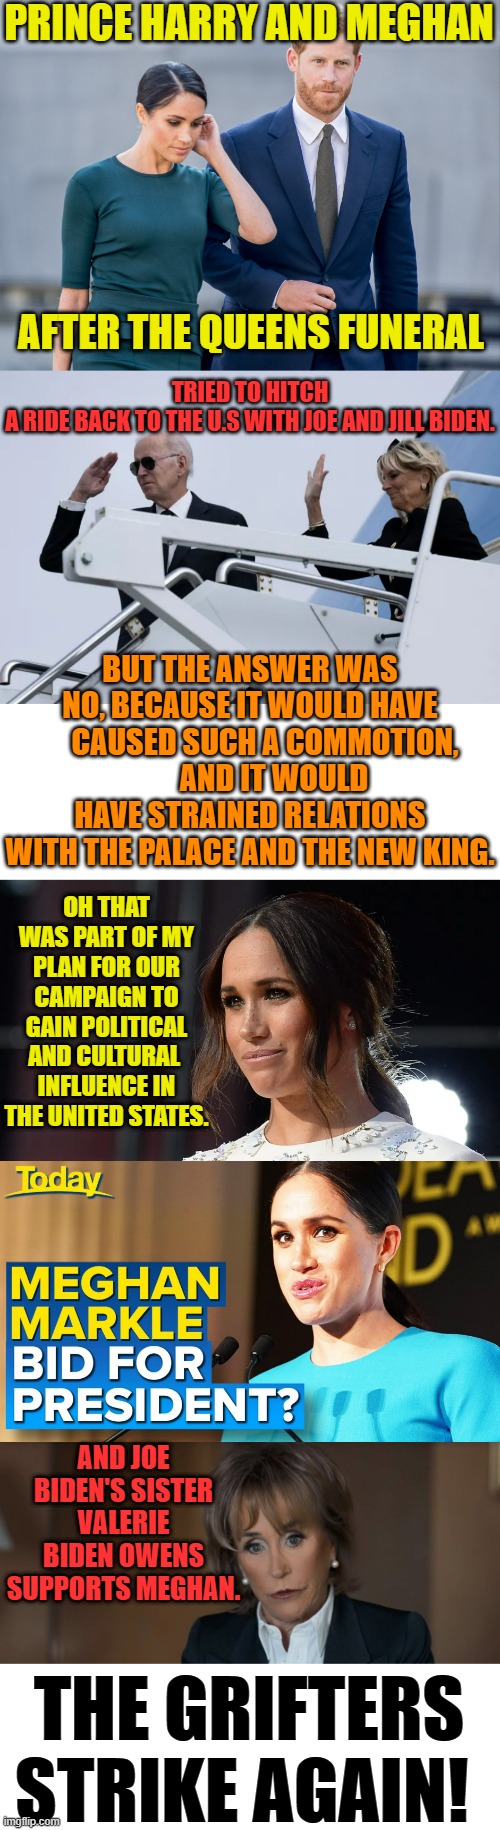 The Grifters Strike Again | PRINCE HARRY AND MEGHAN; TRIED TO HITCH A RIDE BACK TO THE U.S WITH JOE AND JILL BIDEN. AFTER THE QUEENS FUNERAL; BUT THE ANSWER WAS NO, BECAUSE IT WOULD HAVE      CAUSED SUCH A COMMOTION,         AND IT WOULD HAVE STRAINED RELATIONS WITH THE PALACE AND THE NEW KING. OH THAT WAS PART OF MY PLAN FOR OUR CAMPAIGN TO GAIN POLITICAL AND CULTURAL  INFLUENCE IN THE UNITED STATES. AND JOE BIDEN'S SISTER VALERIE BIDEN OWENS SUPPORTS MEGHAN. THE GRIFTERS STRIKE AGAIN! | image tagged in memes,politics,prince harry,meghan markle,strike,again | made w/ Imgflip meme maker